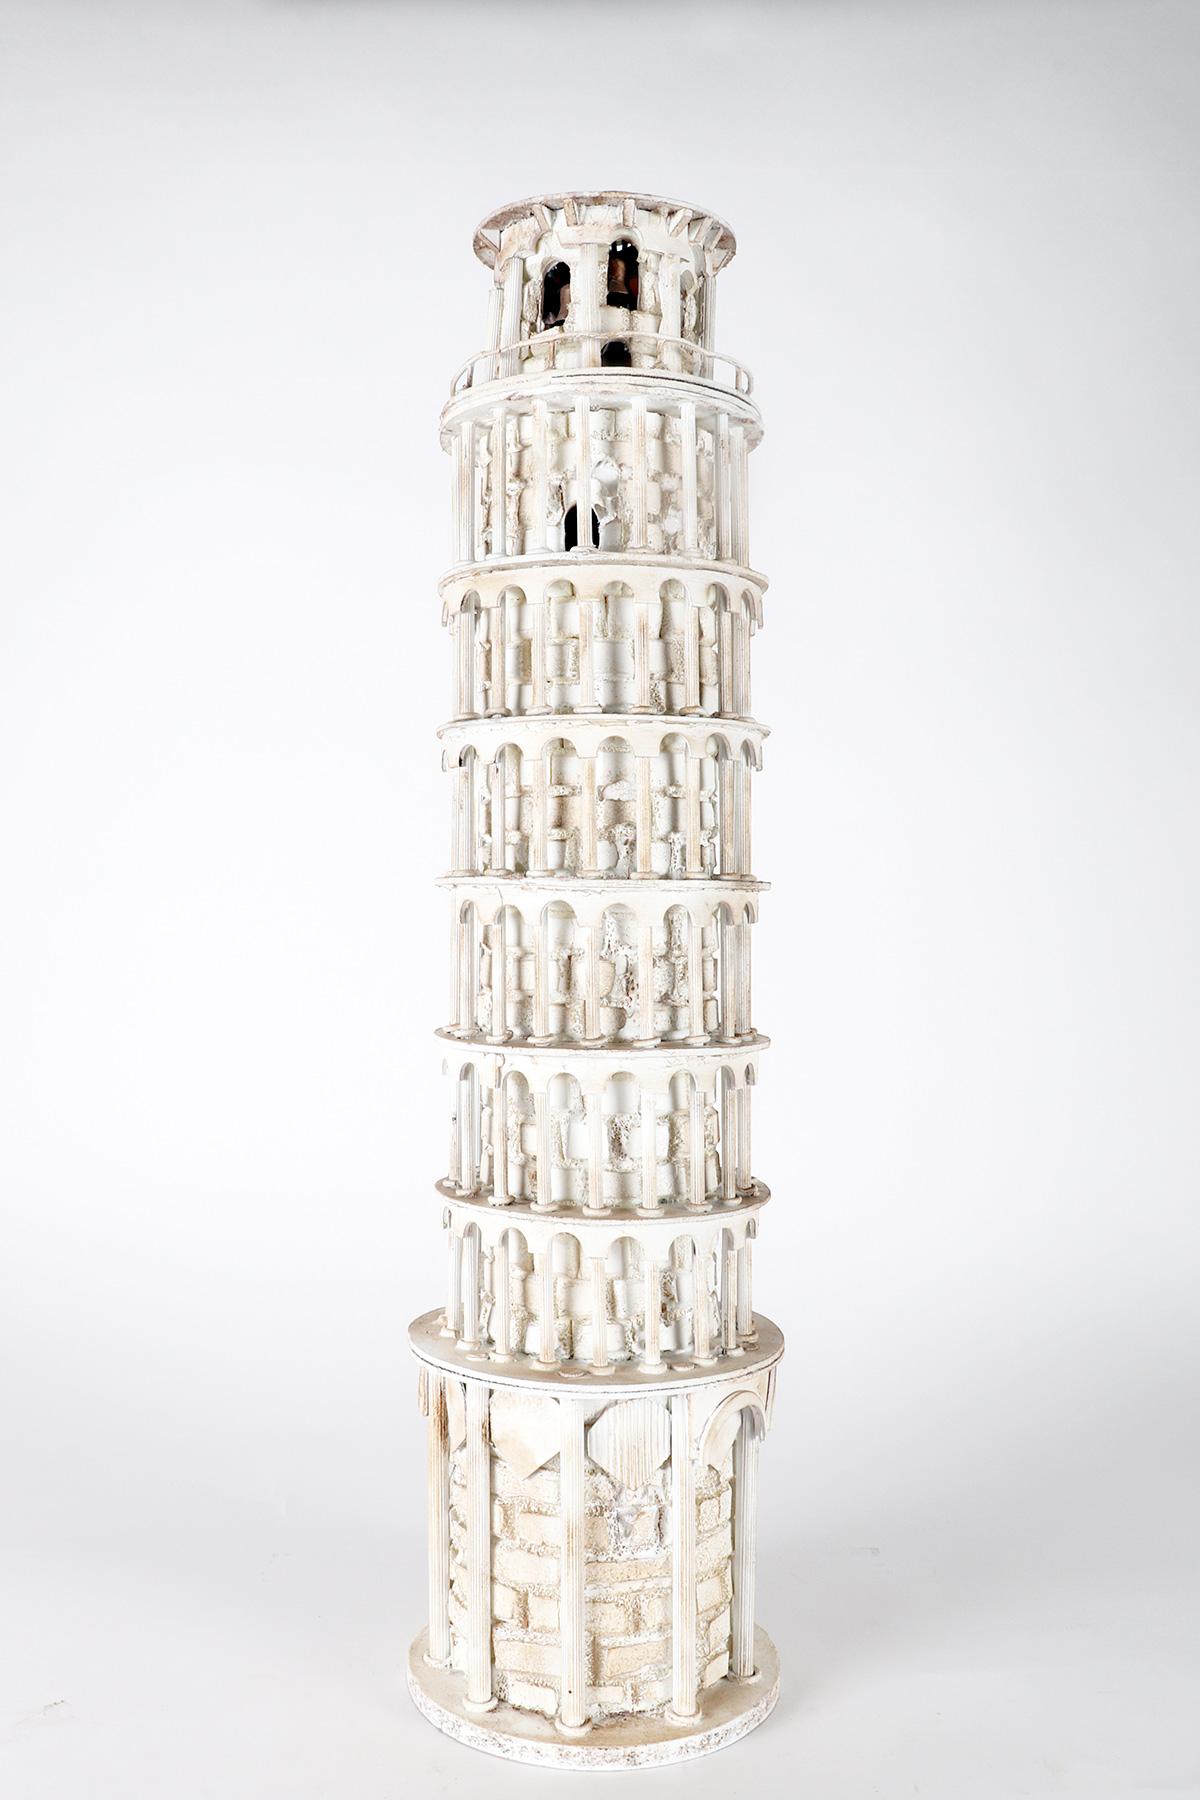 20th Century A Grand Tour wooden maquette, depicting the Tower of Pisa, Italy 1950. For Sale